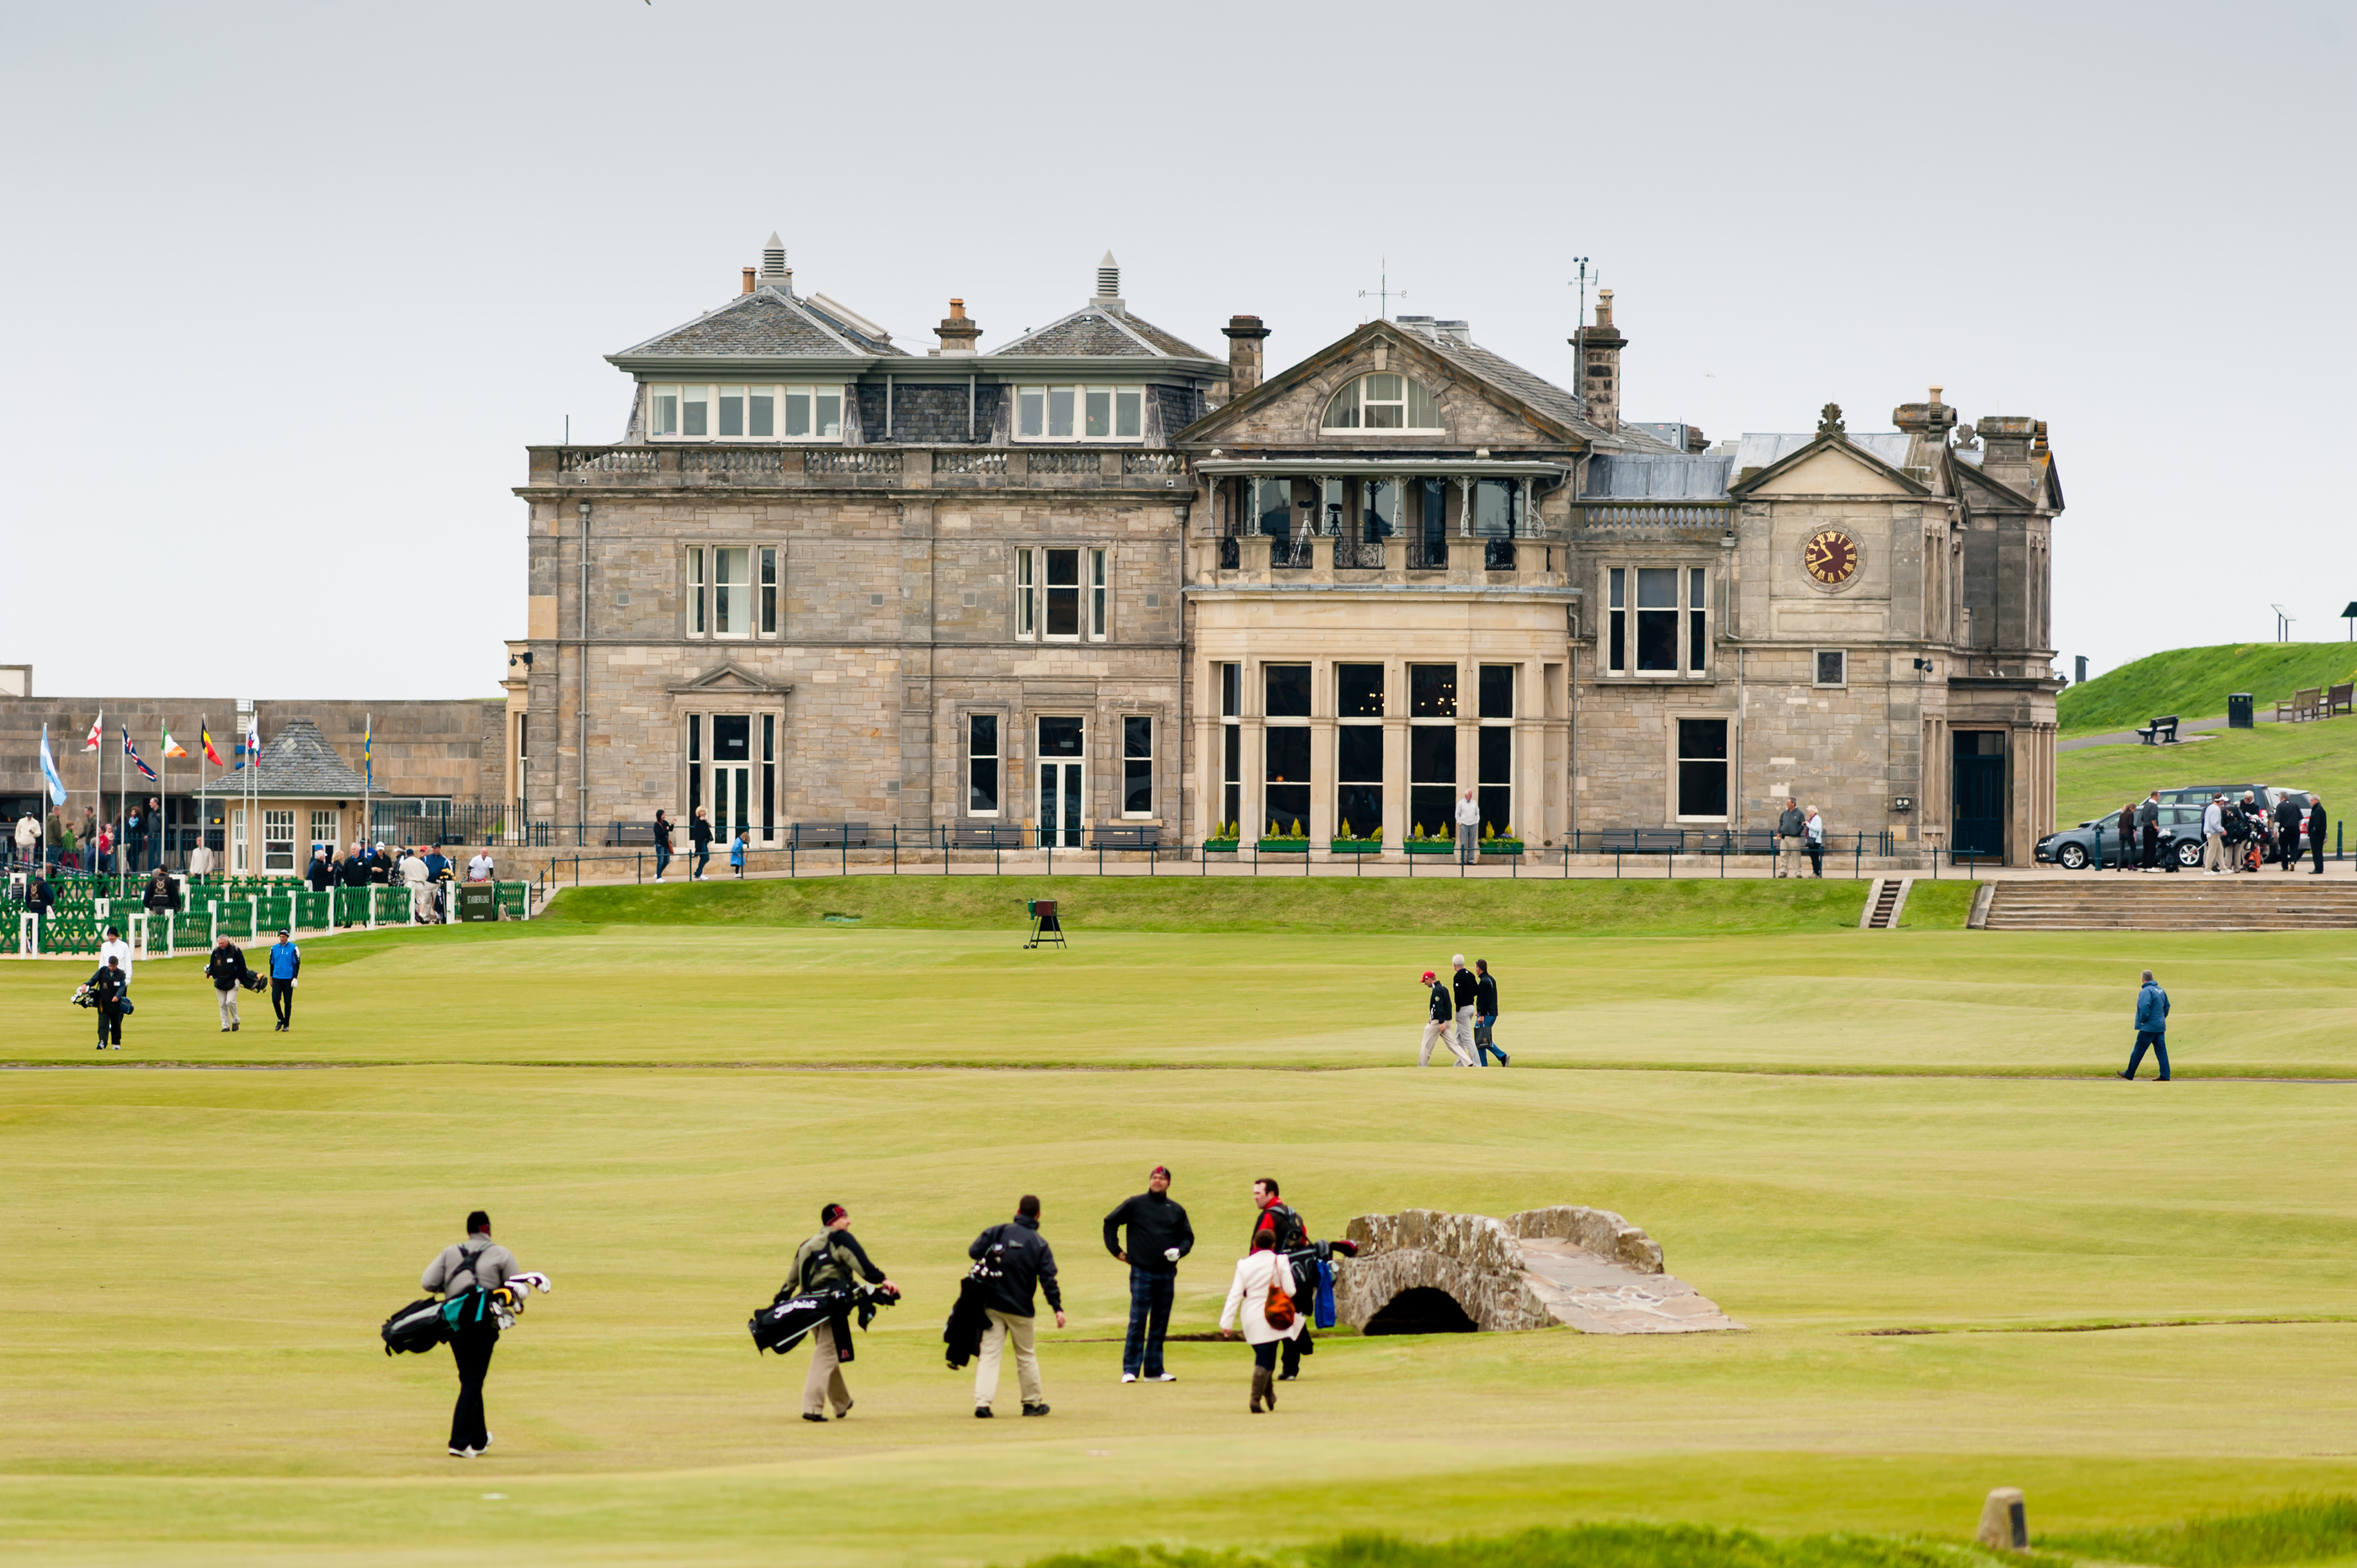 18 reasons why St. Andrews is not just golf